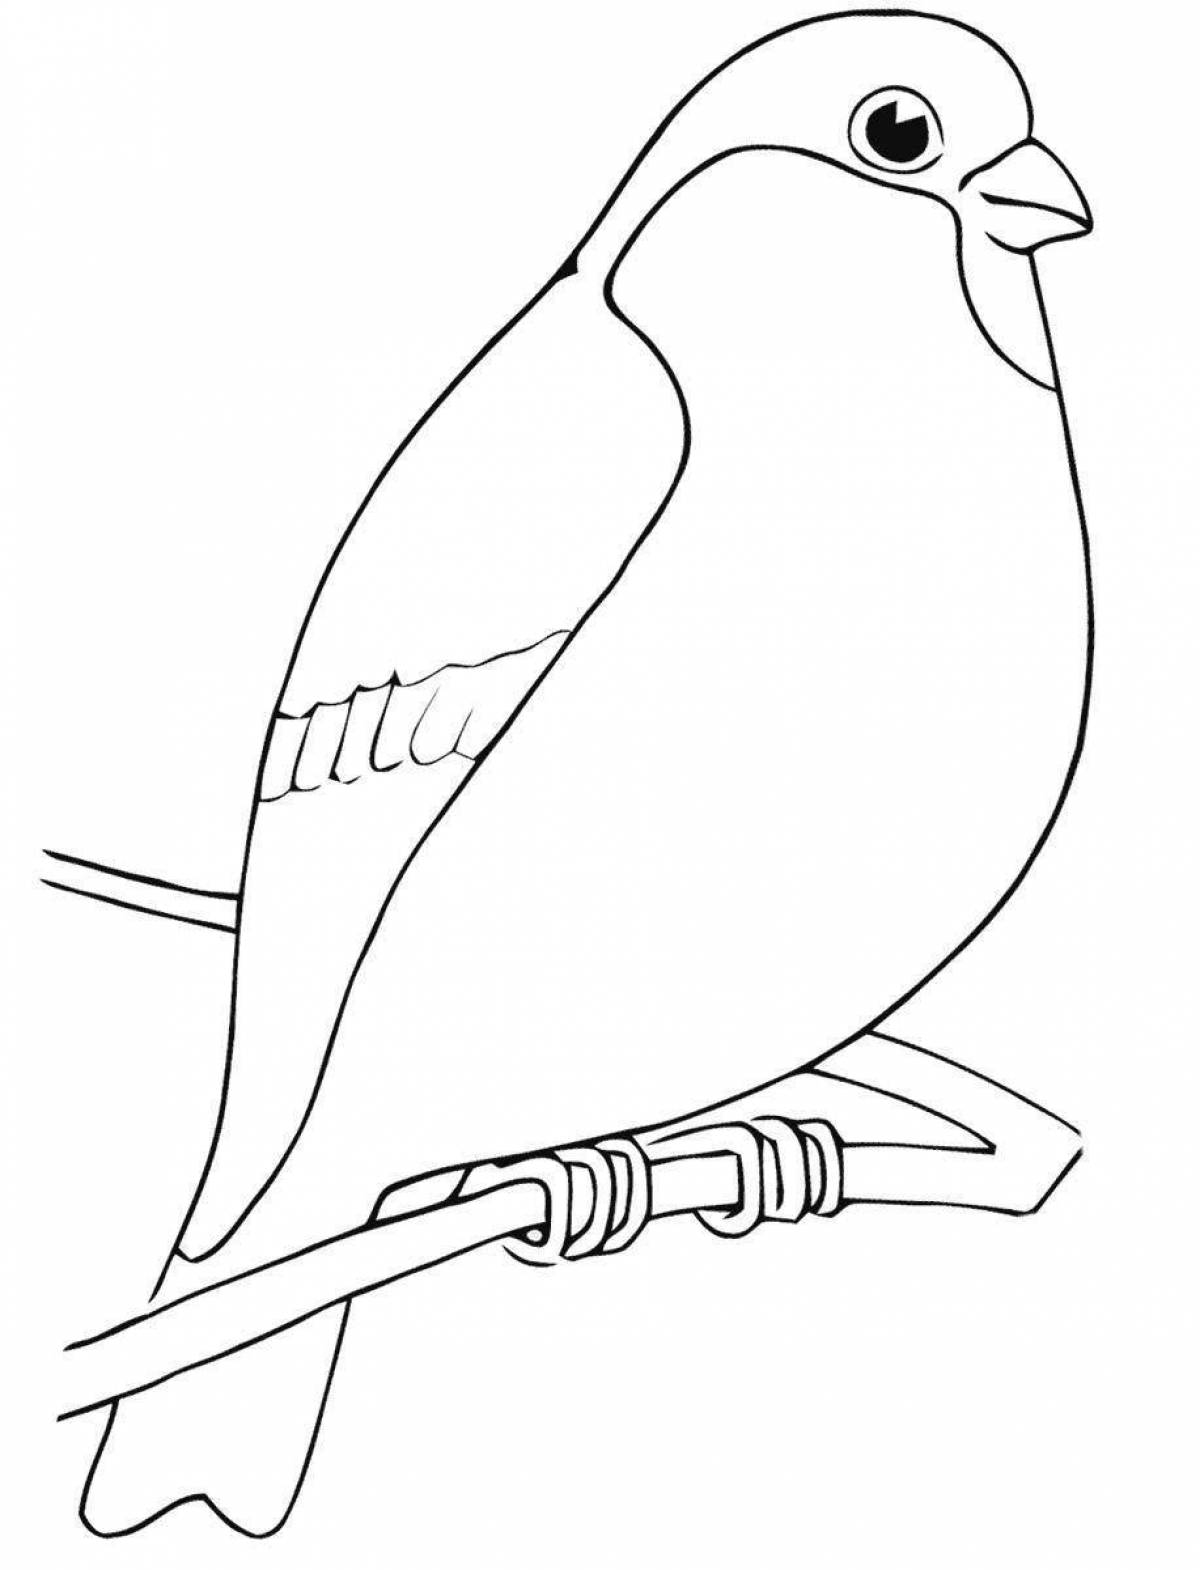 Incredible bullfinch coloring book for kids 4-5 years old